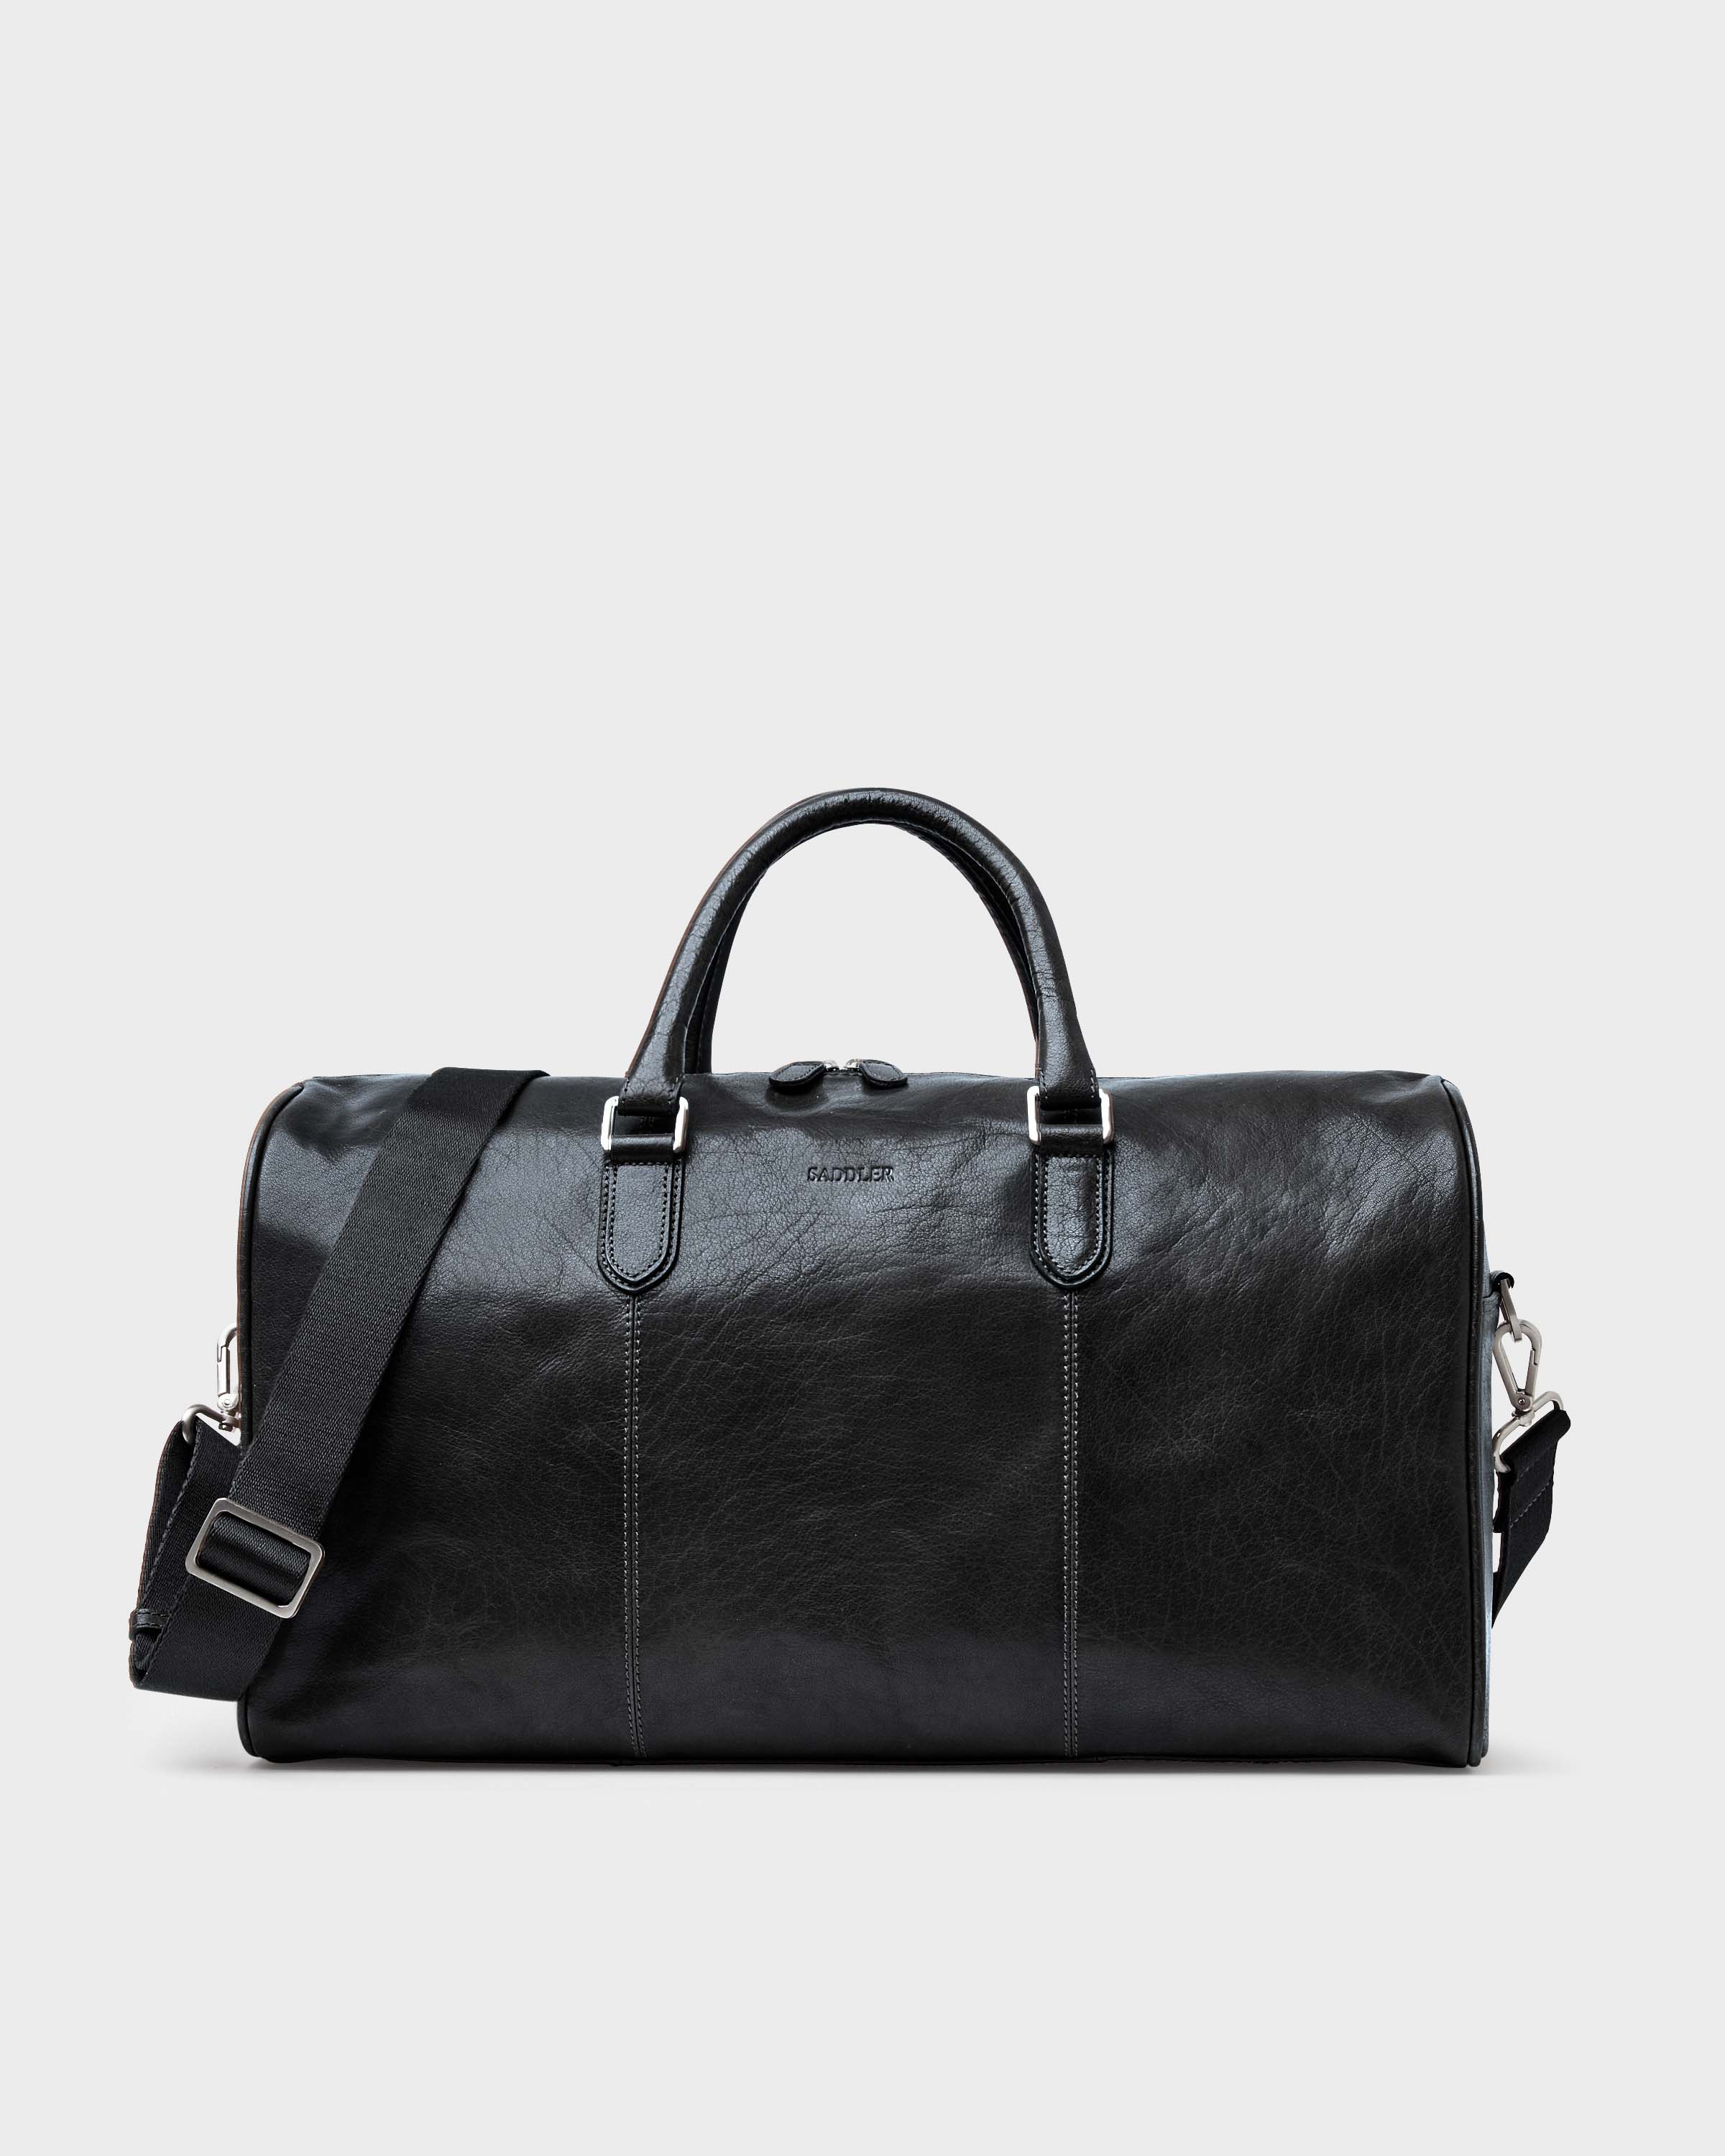 Weekend bags for men at saddlercom  The Swedish leather brand